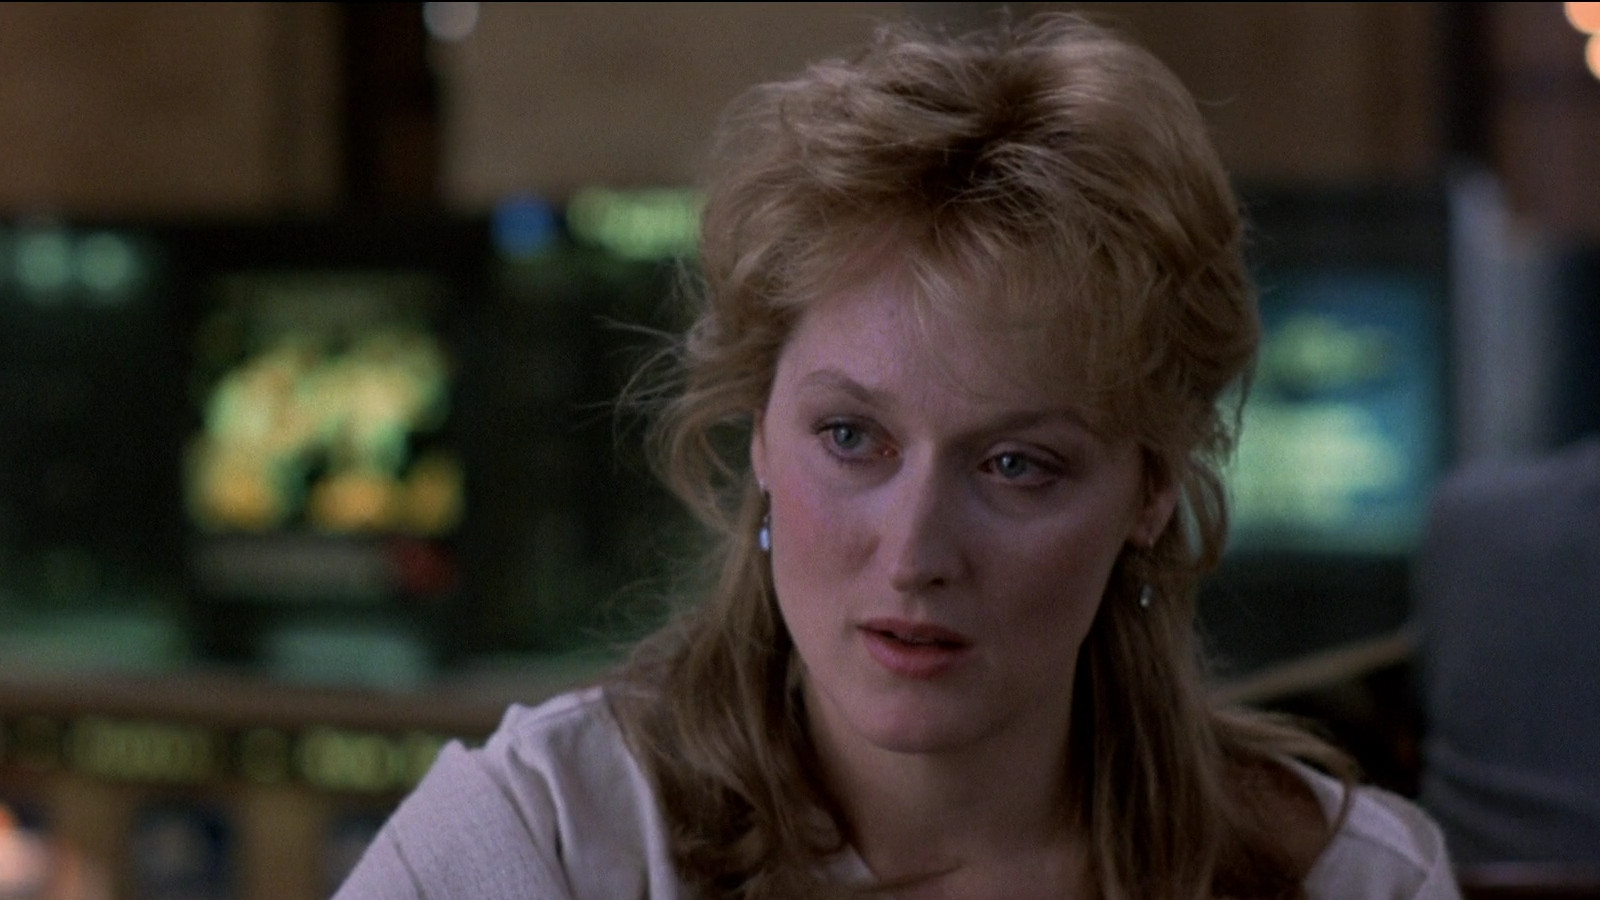 <p>Streep is widely considered the greatest actress of all time, and it's easy to see why. She won the second of her three Best Actress Oscars for <em>Sophie's Choice</em> in 1983, years after breaking out in 1978's <em>The Deer Hunter</em>, which she followed with 1979's <em>Kramer vs. Kramer</em> (for which she won her first Oscar). </p>  <p>Her chameleonic '80s run saw her bouncing from <em>Out of Africa</em> to <em>Ironweed </em>to <em>Heartburn</em> (above)to <em>She-Devil</em>. </p>  <p>After comical work as a heartless president of the United States in 2021's <em>Don't Look Up</em>, she turned to streaming in the Amazon series <em>Extrapolations</em> and Hulu's <em>Only Murders in the Building</em>, with the next star on our list. Oh, and did we mention she's good at accents?</p>